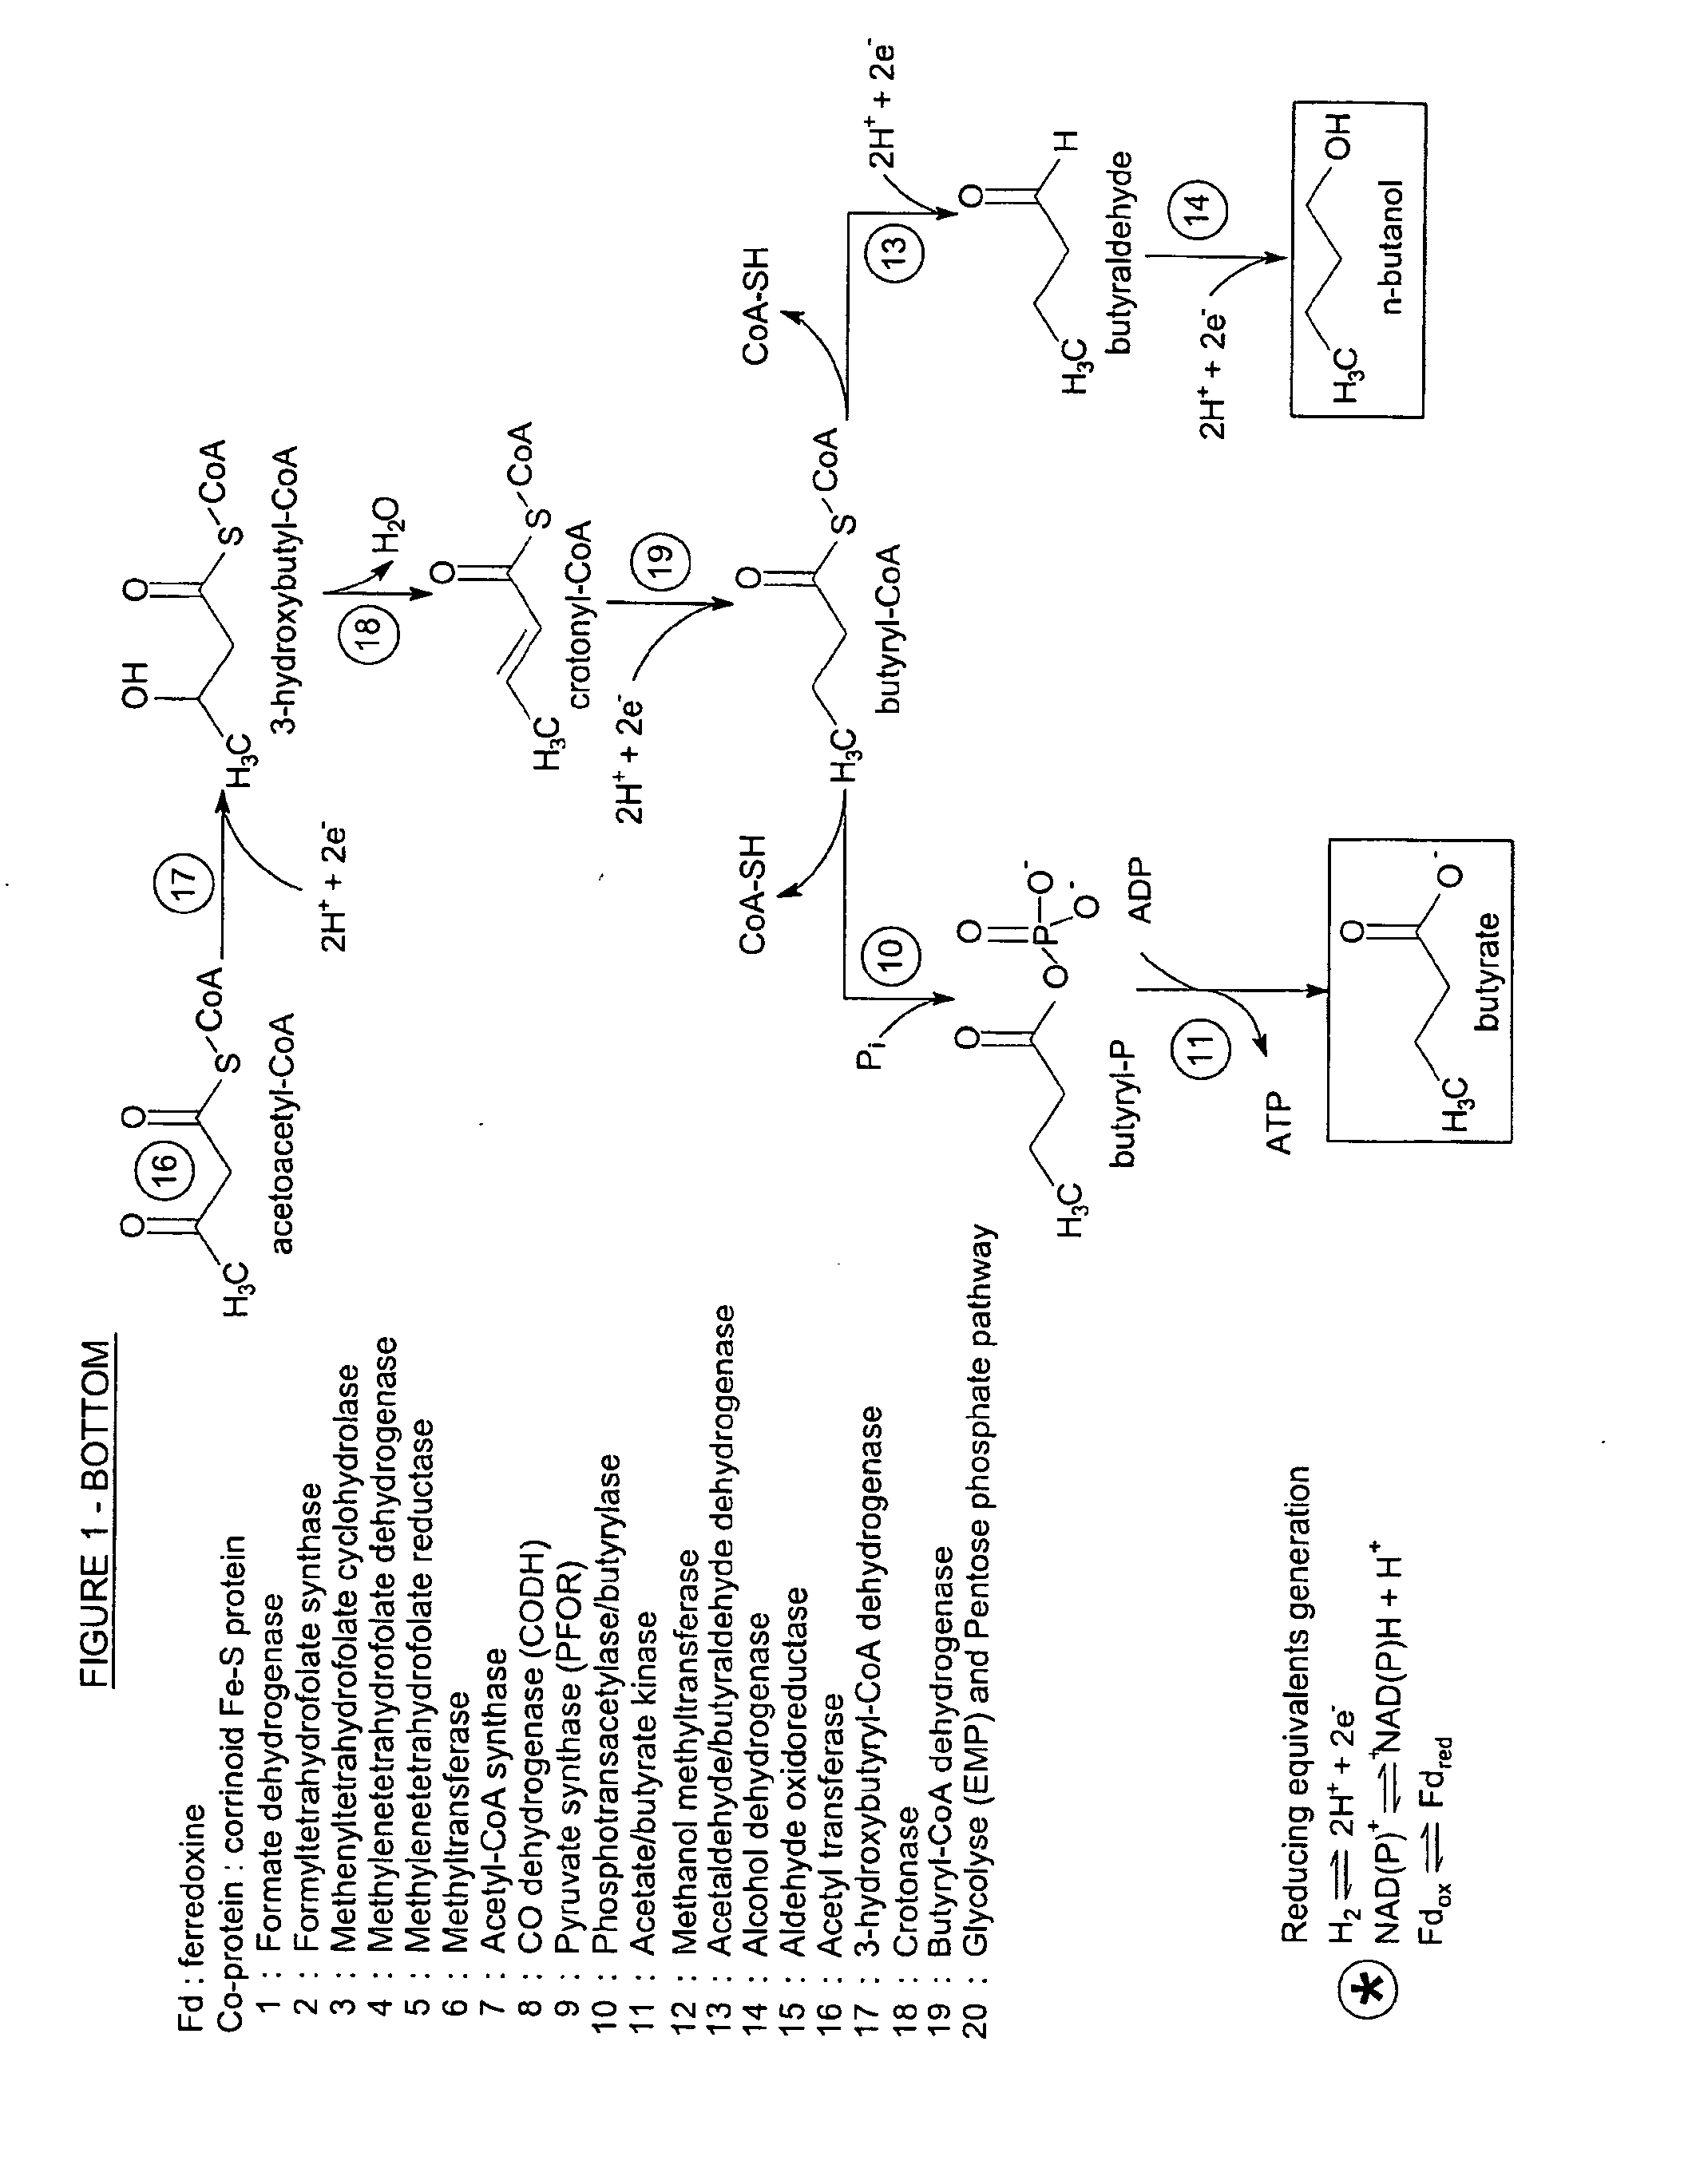 Process for producing propylene from syngas via fermentative propanol production and dehydration